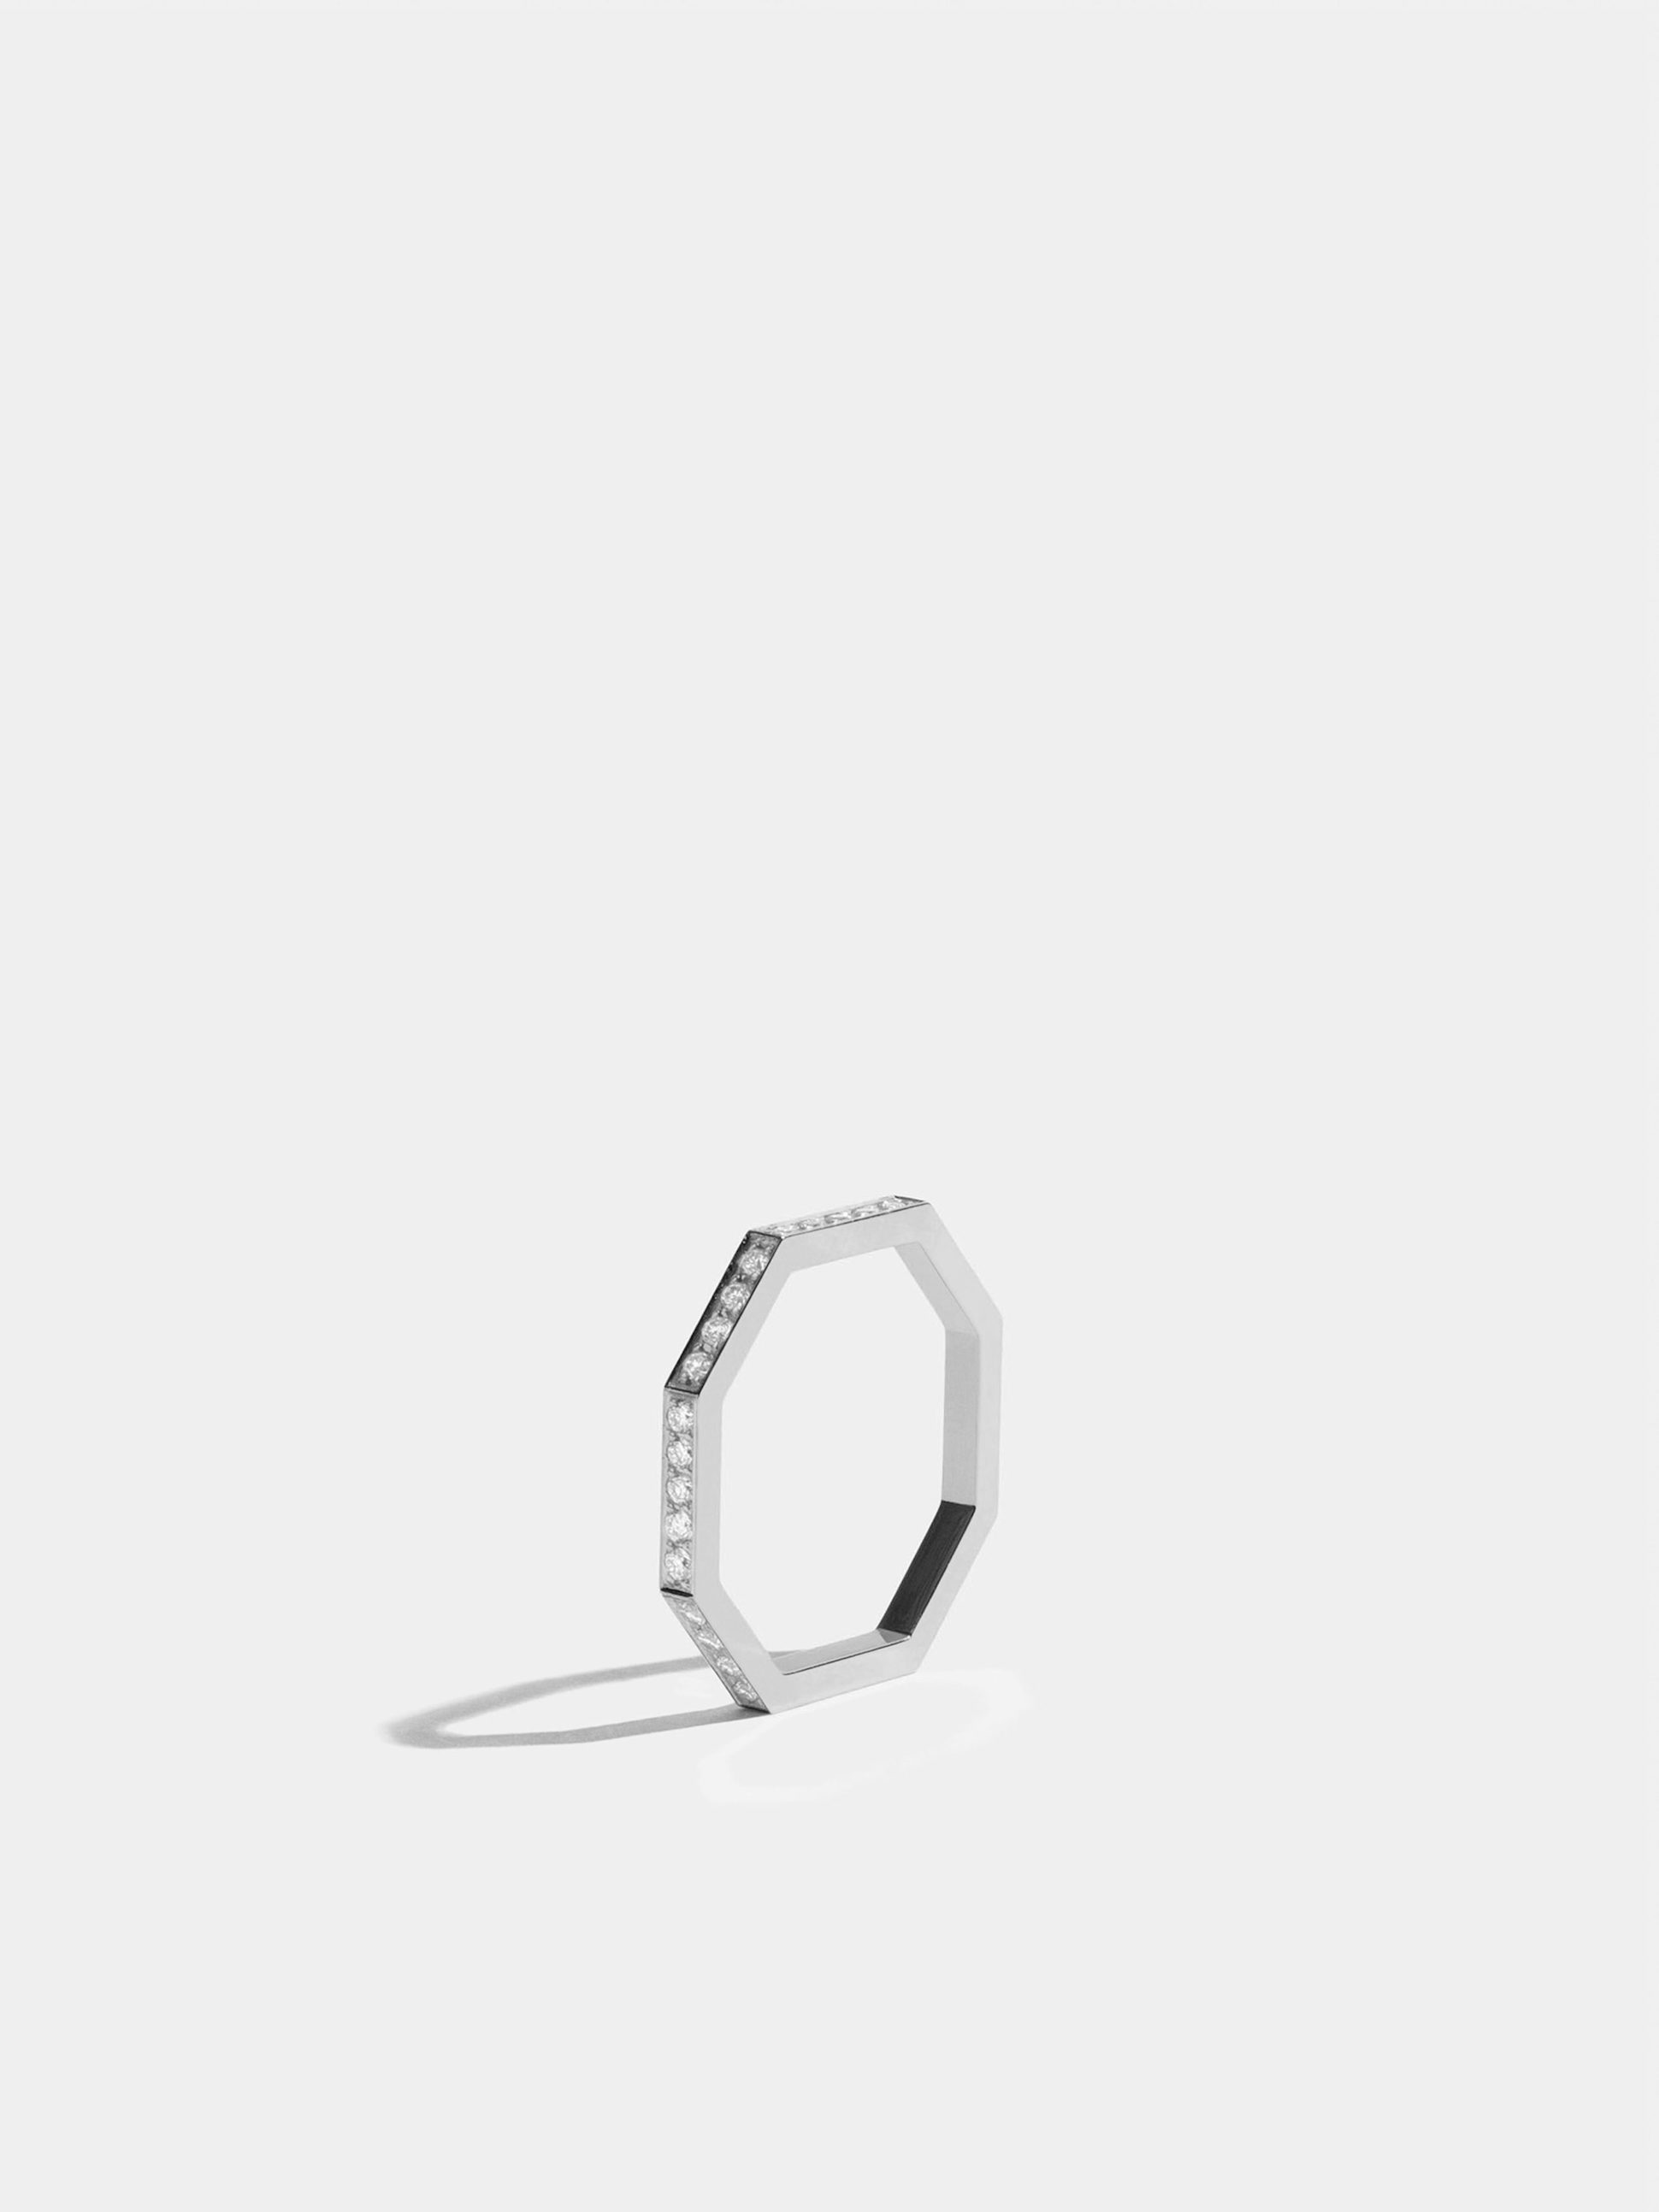 Octogone simple ring in 18k Fairmined ethical white gold and paved with lab-grown diamonds